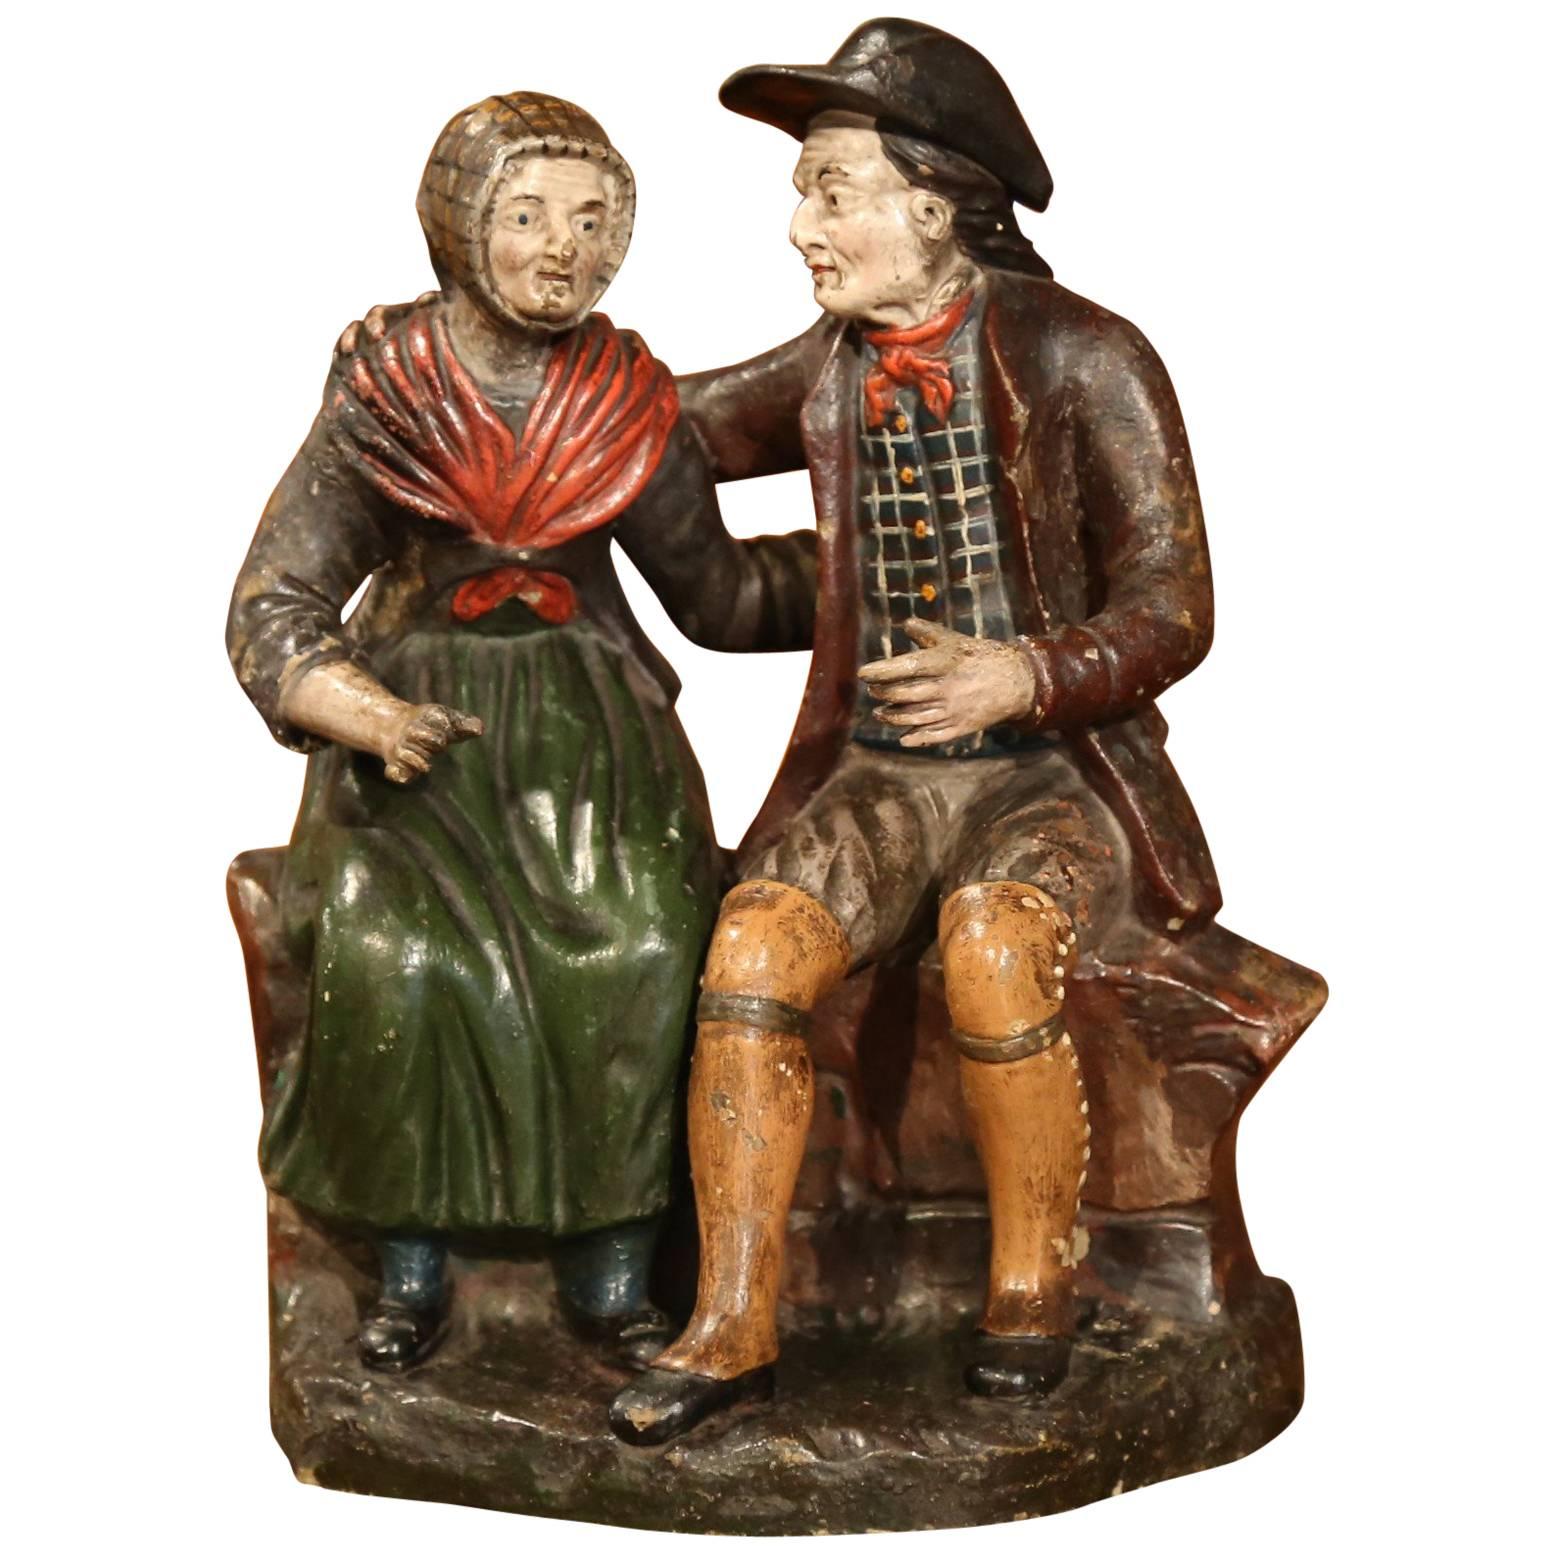 19th Century French Hand-Painted Ceramic Sculpture of Old Couple